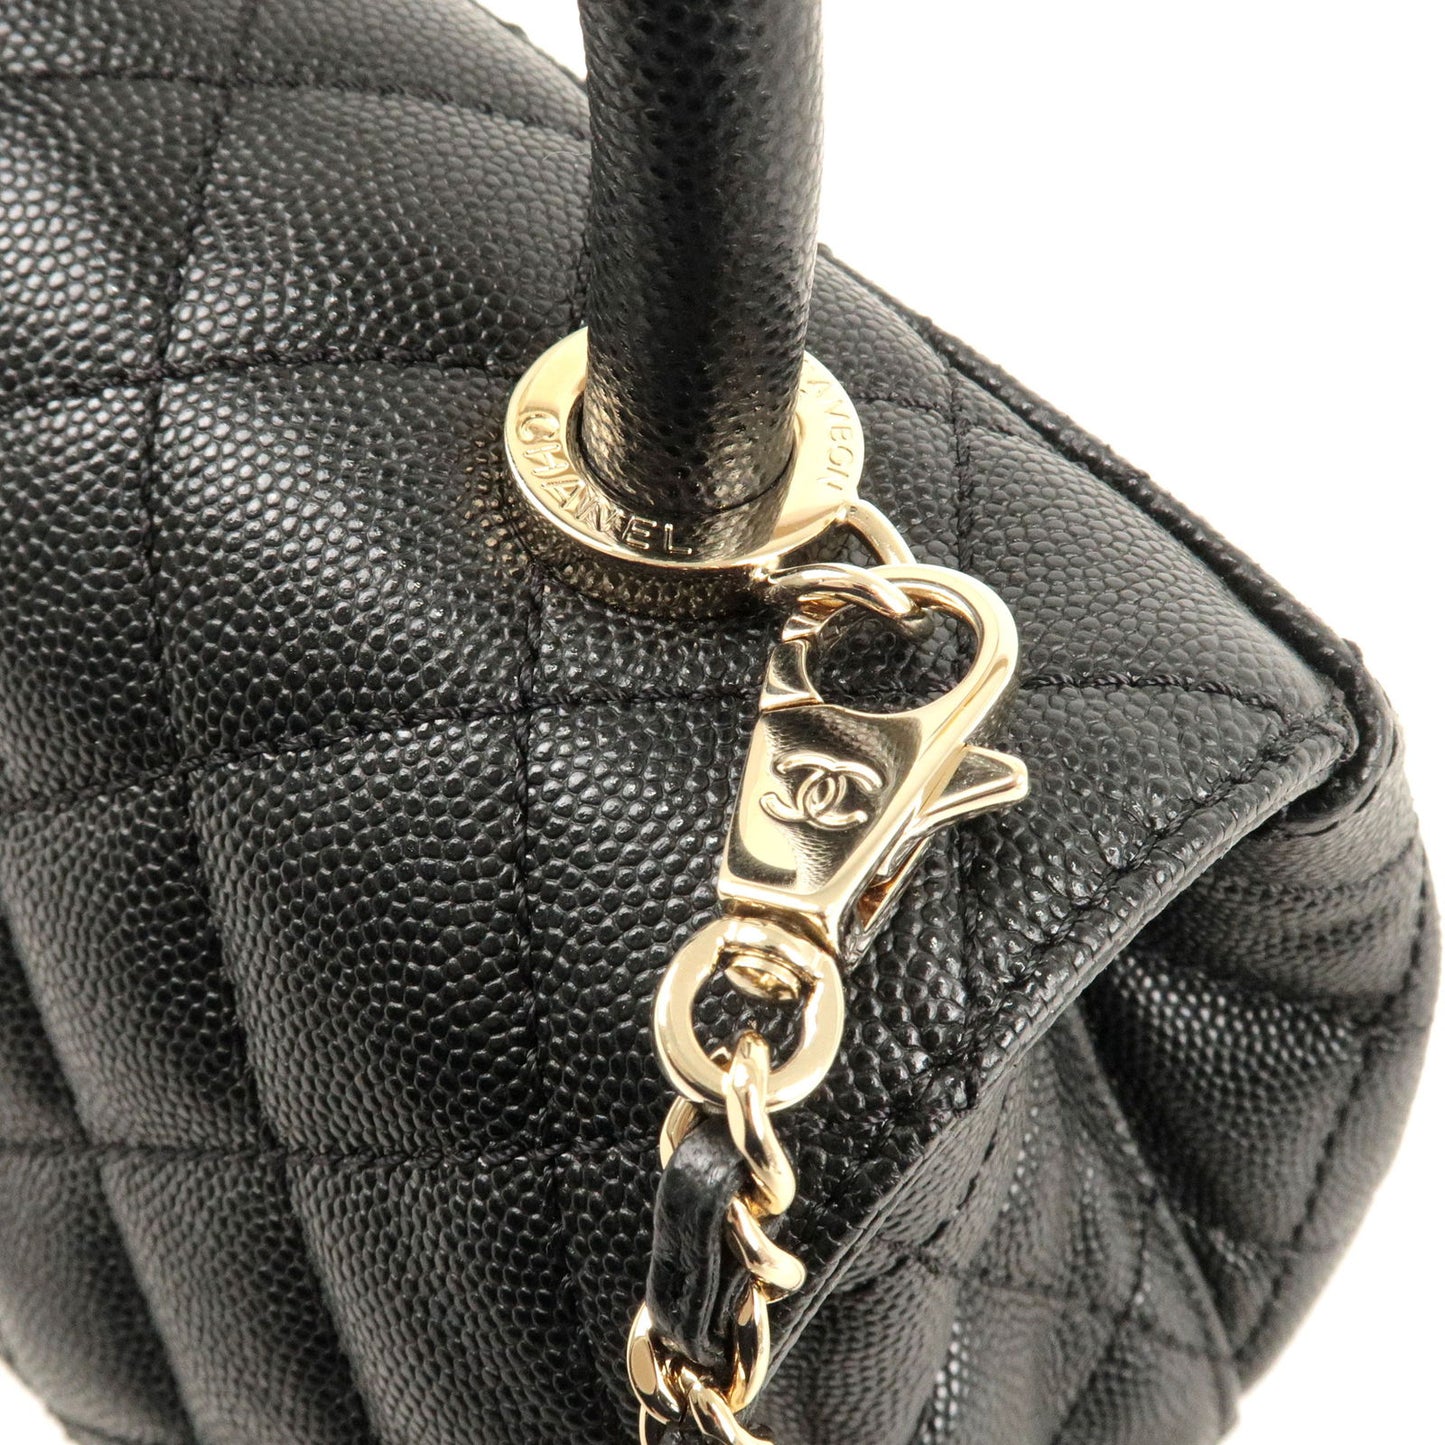 CHANEL-COCO-Handle-Matelasse-Caviar-Skin-XXS-Bag-Red-AS2215 –  dct-ep_vintage luxury Store